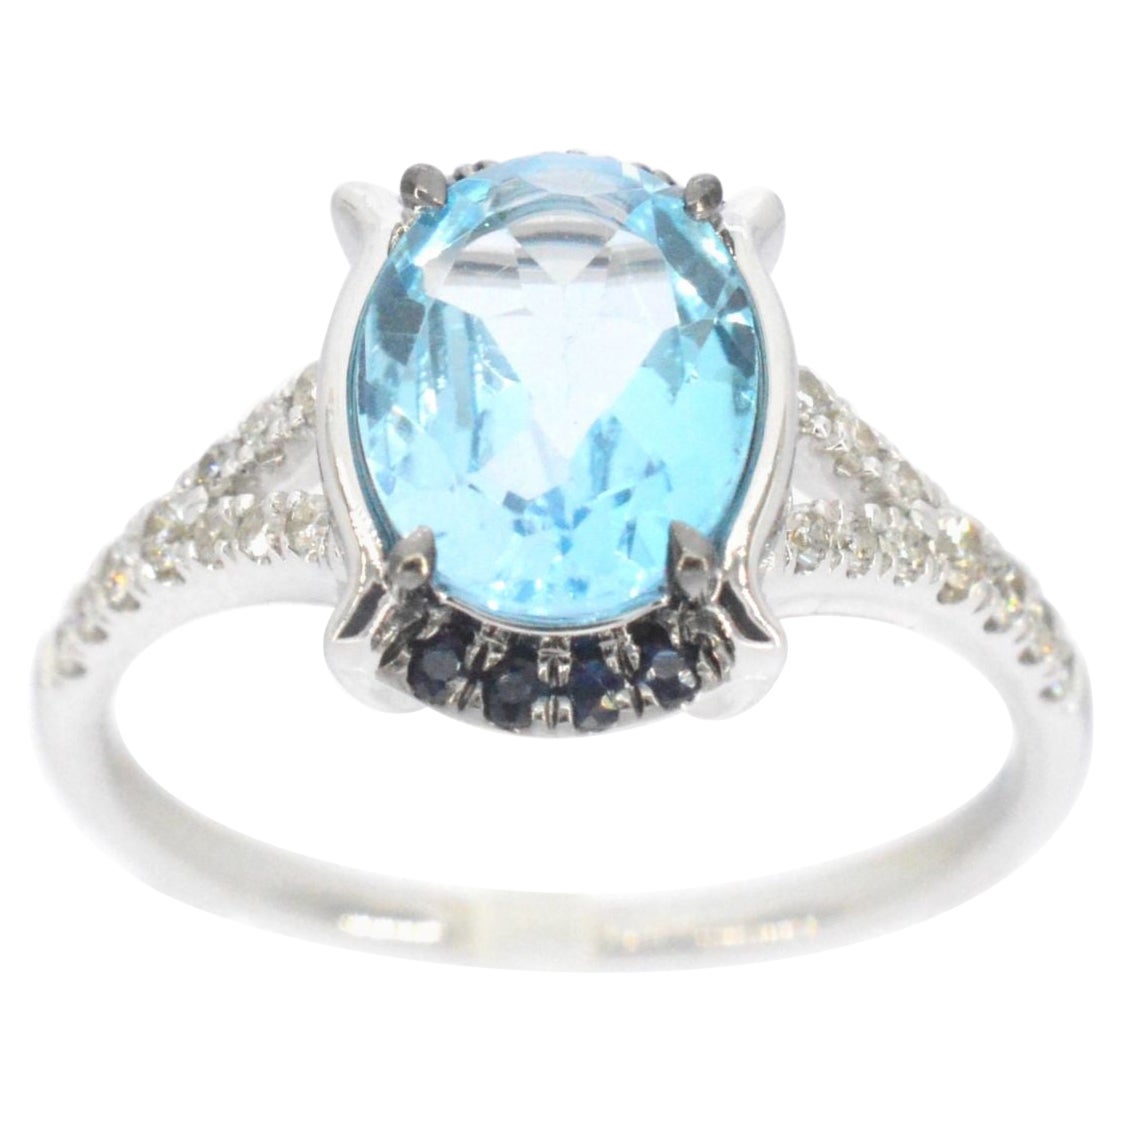 White Gold Ring with Diamonds and Beautiful Topaz with Sapphire